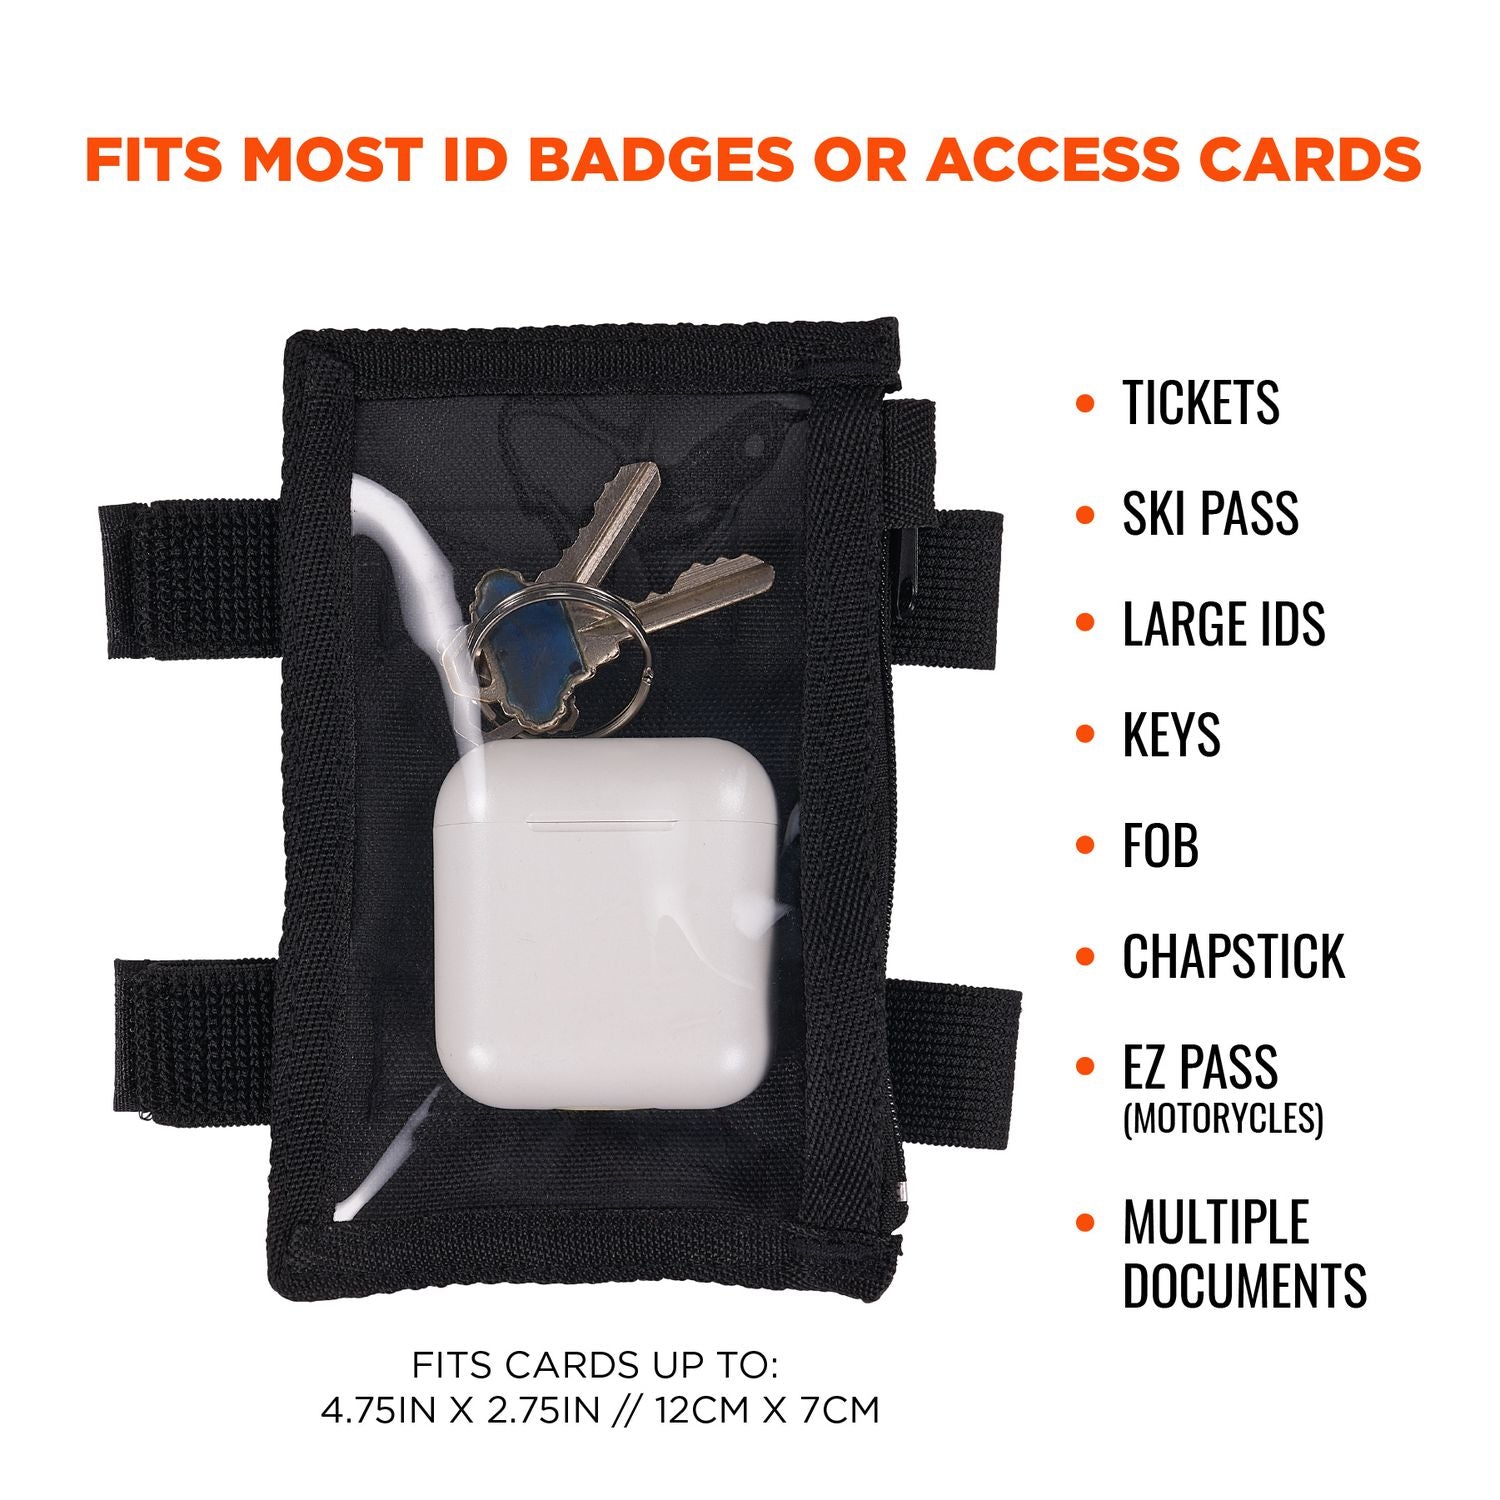 squids-3387-dual-band-arm-id-badge-holder-w-zipper-vertical-black-375-x-575-for-275-x-475-insert-ships-in-1-3-bus-days_ego19959 - 6